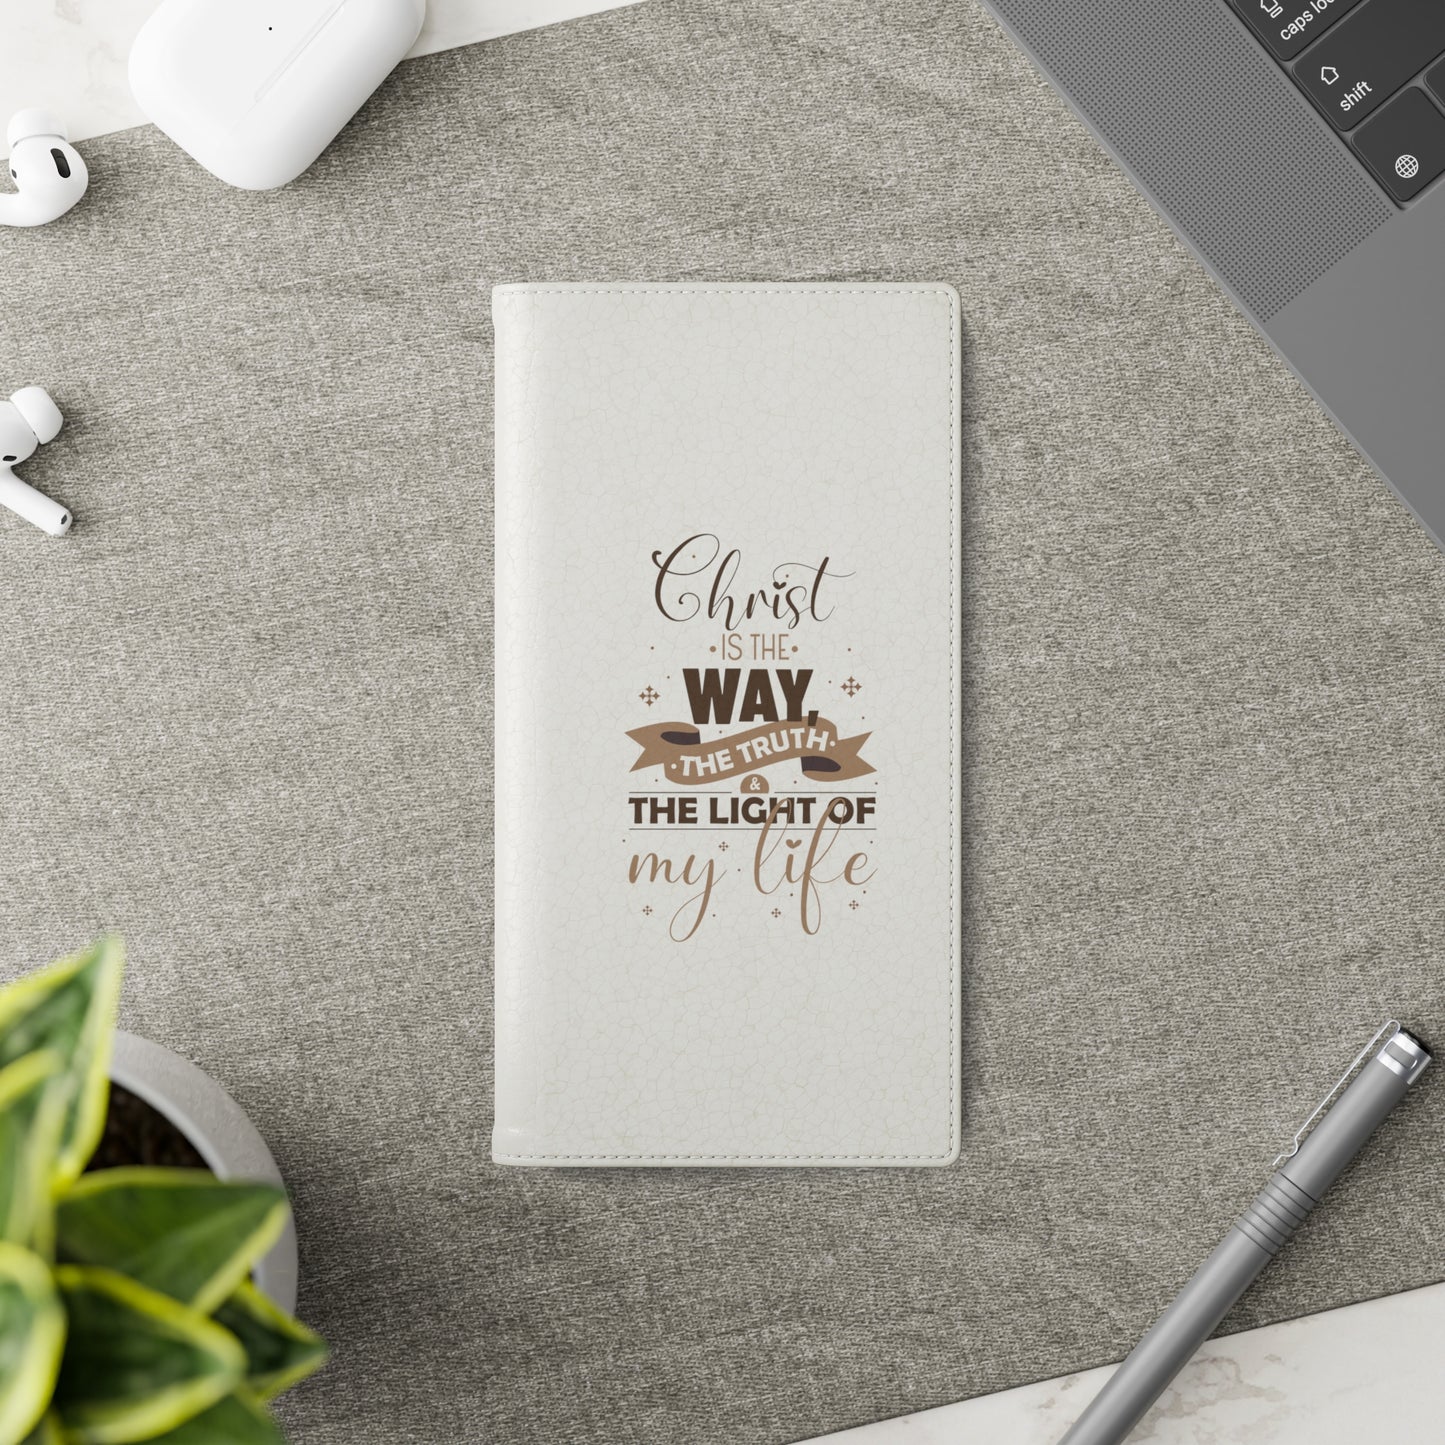 Christ Is The Way, The Truth, & The Light Of My Life Phone Flip Cases